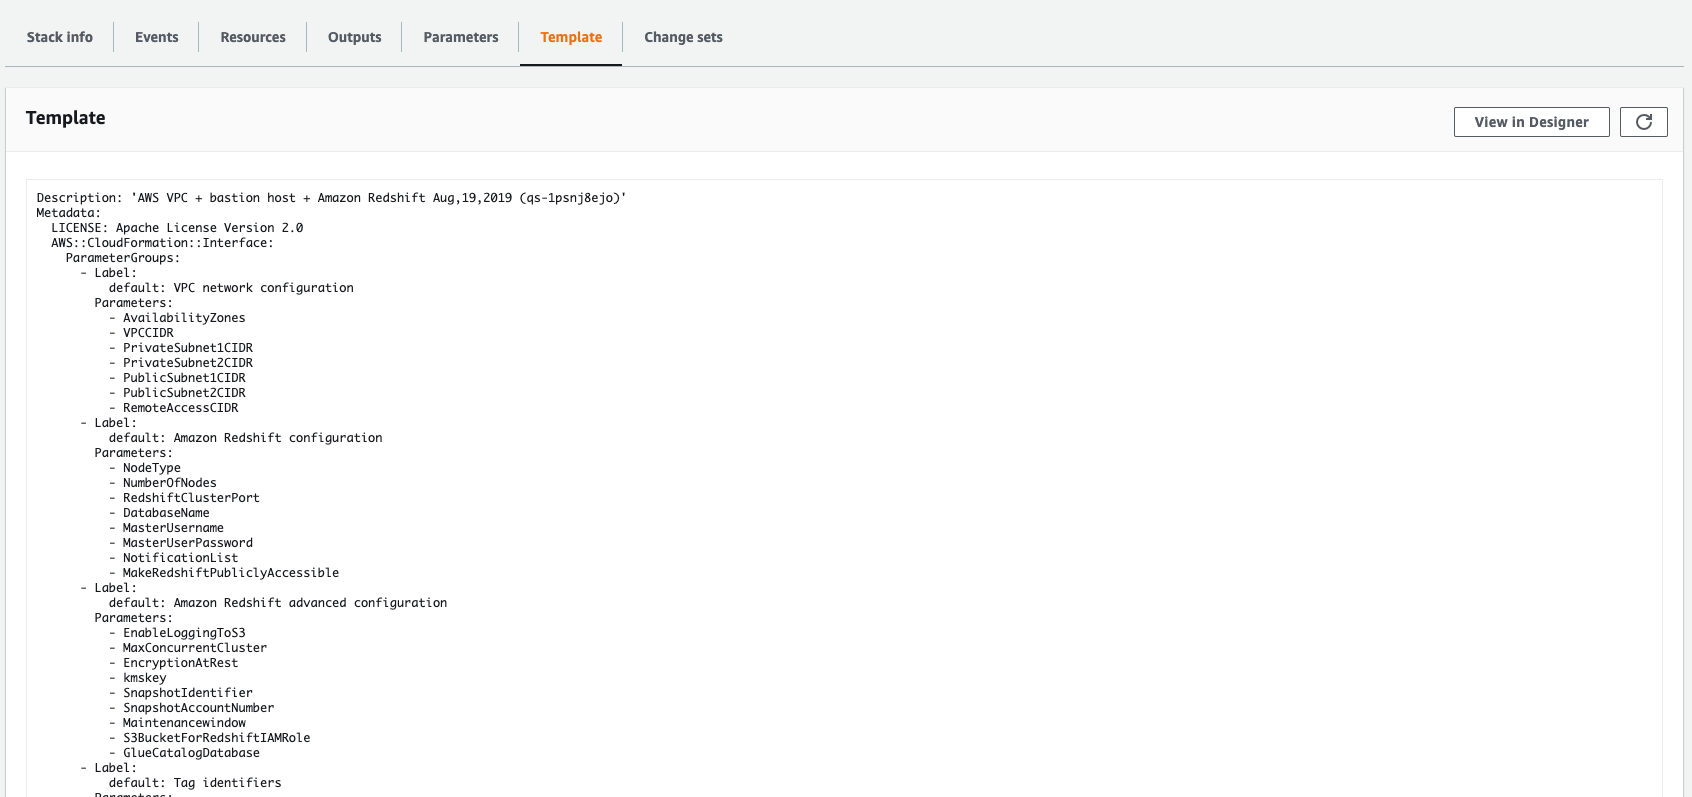 AWS Management Console CloudFormation/Services with the Template tab highlighted in red